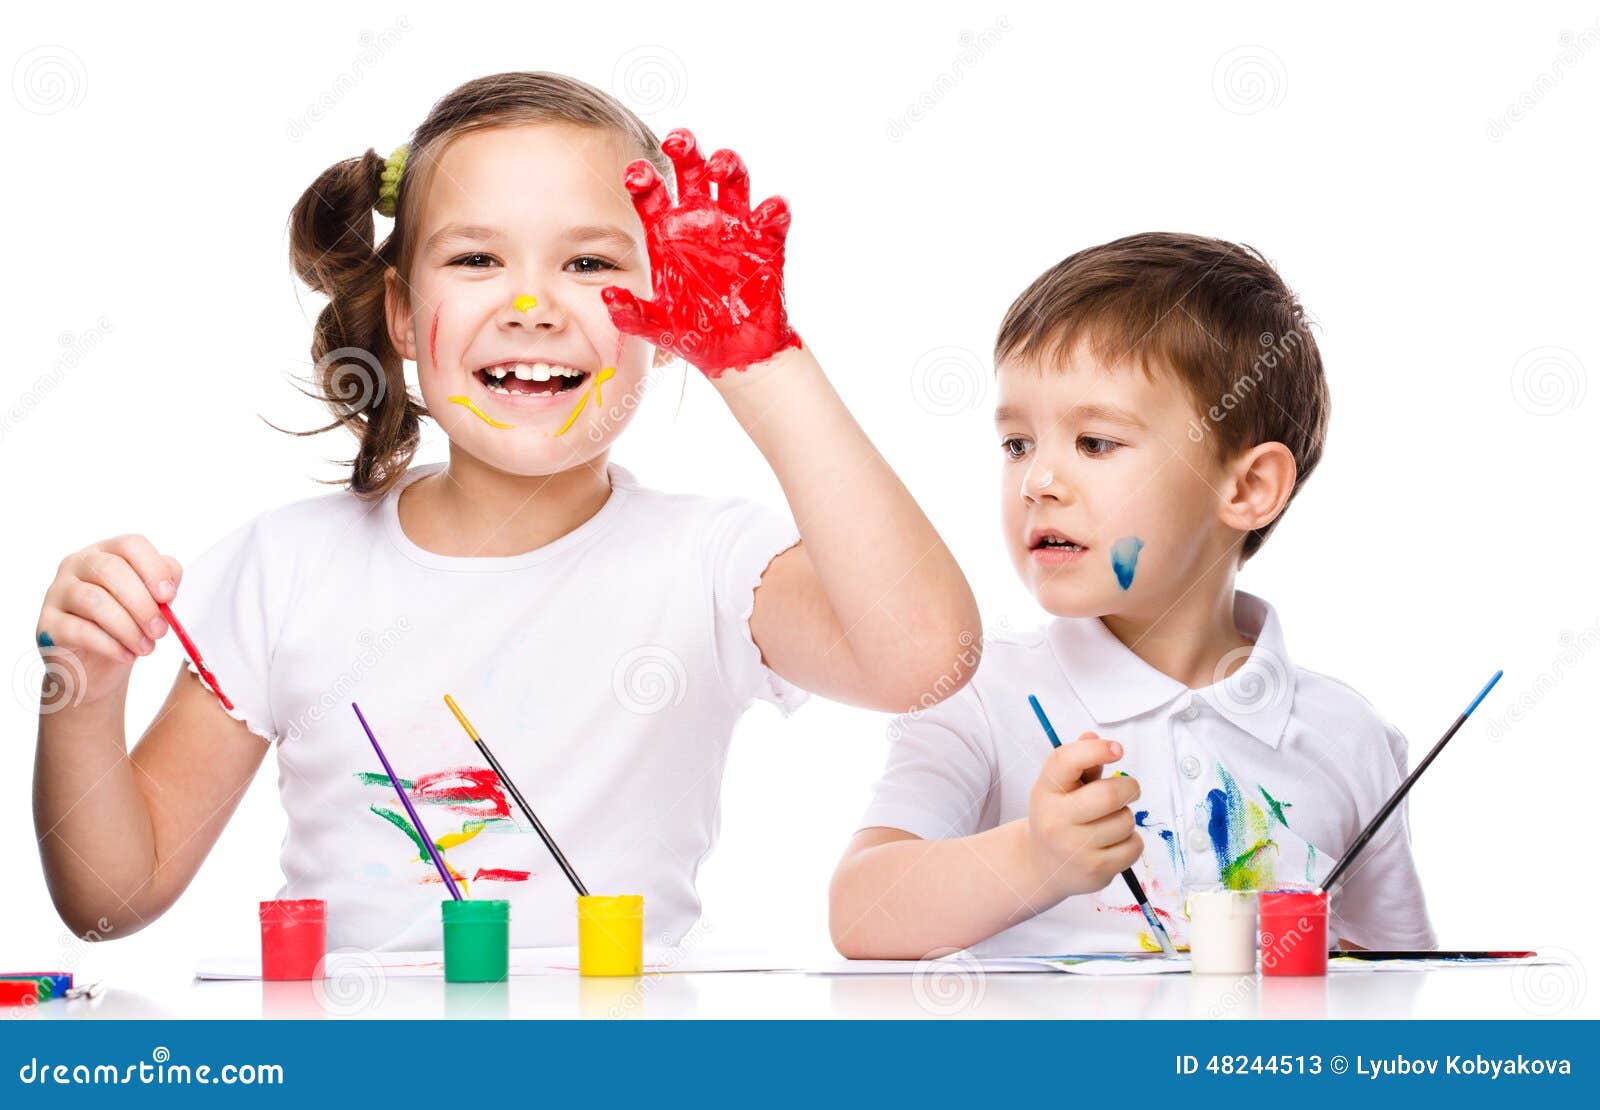 Cute Boy and Girl Playing with Paints Stock Image - Image of cutout ...